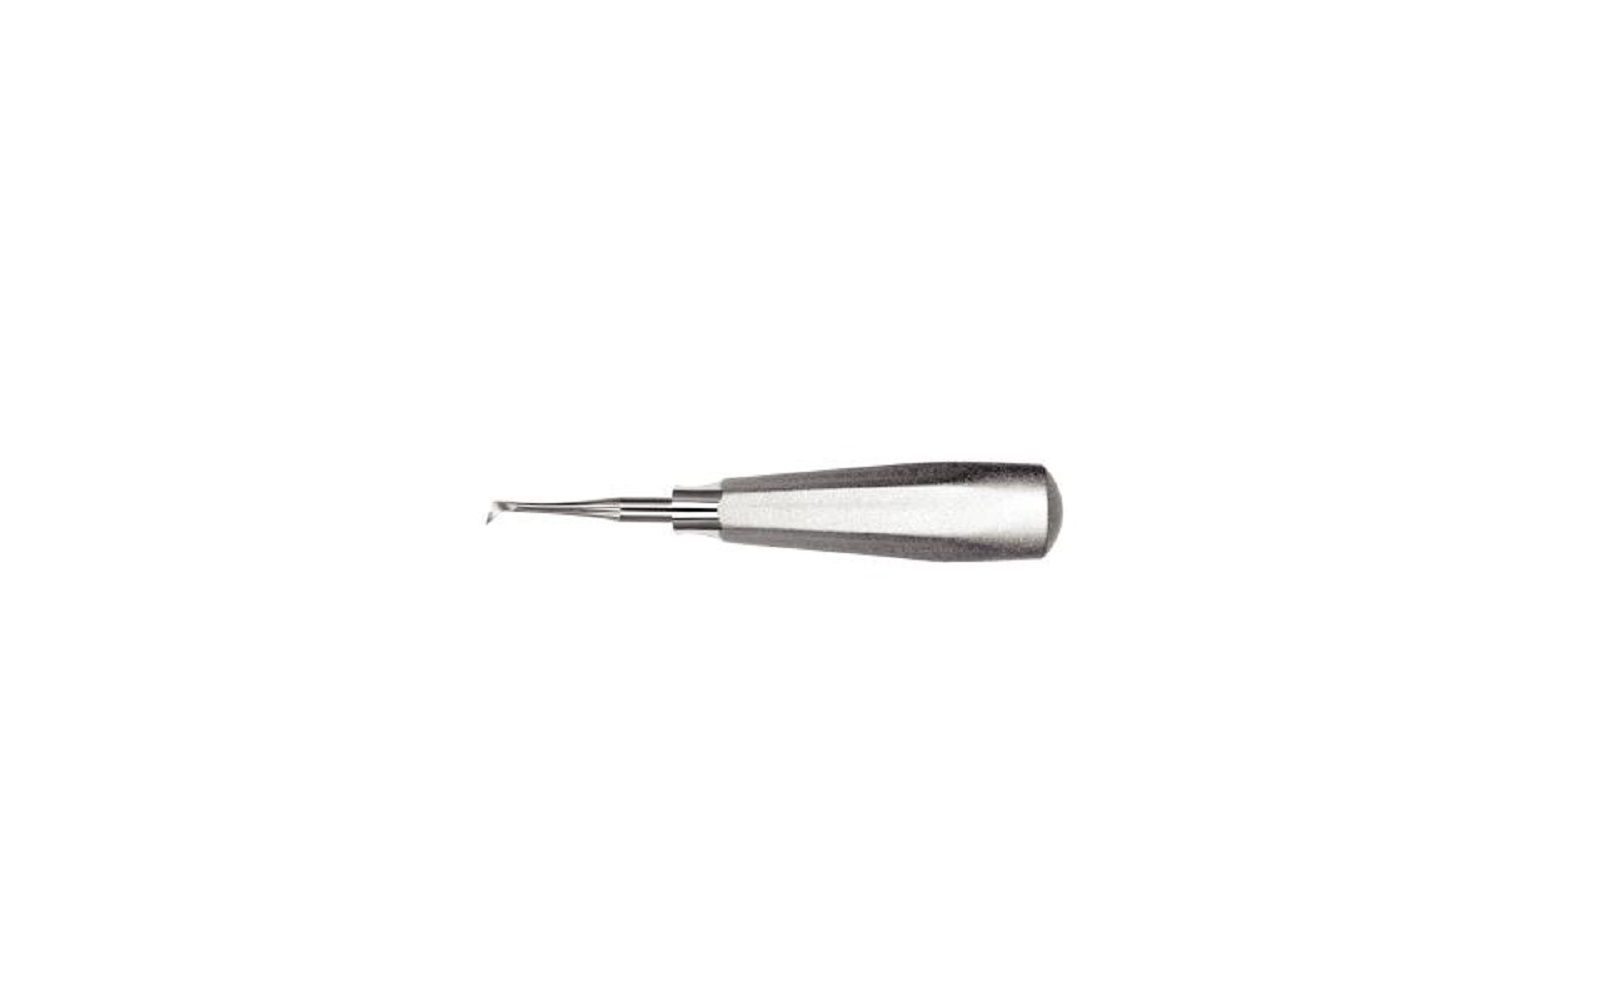 Surgical elevators – cryer, miniature, right, large tapered hexagonal handle, single end